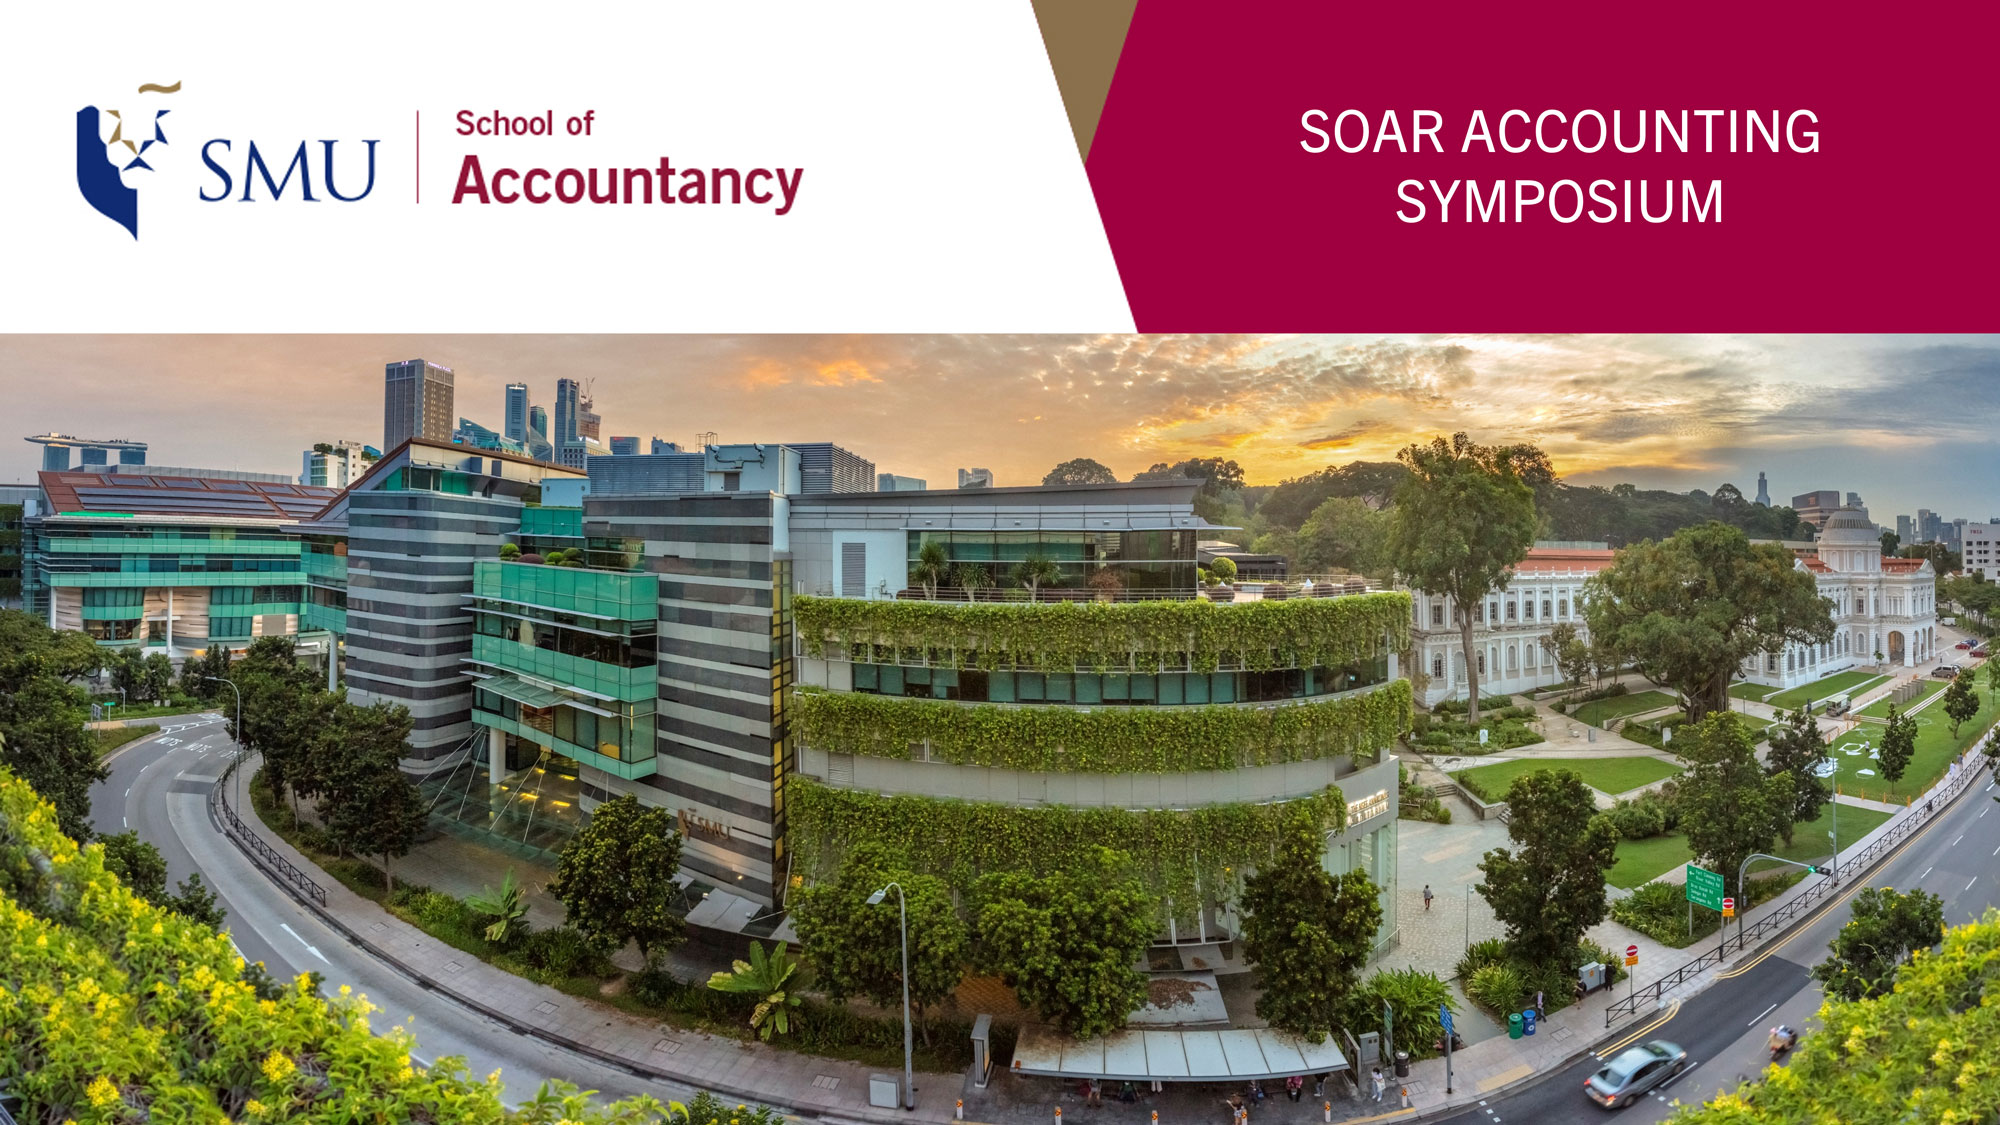 About SOAR Accounting Symposium School of Accountancy